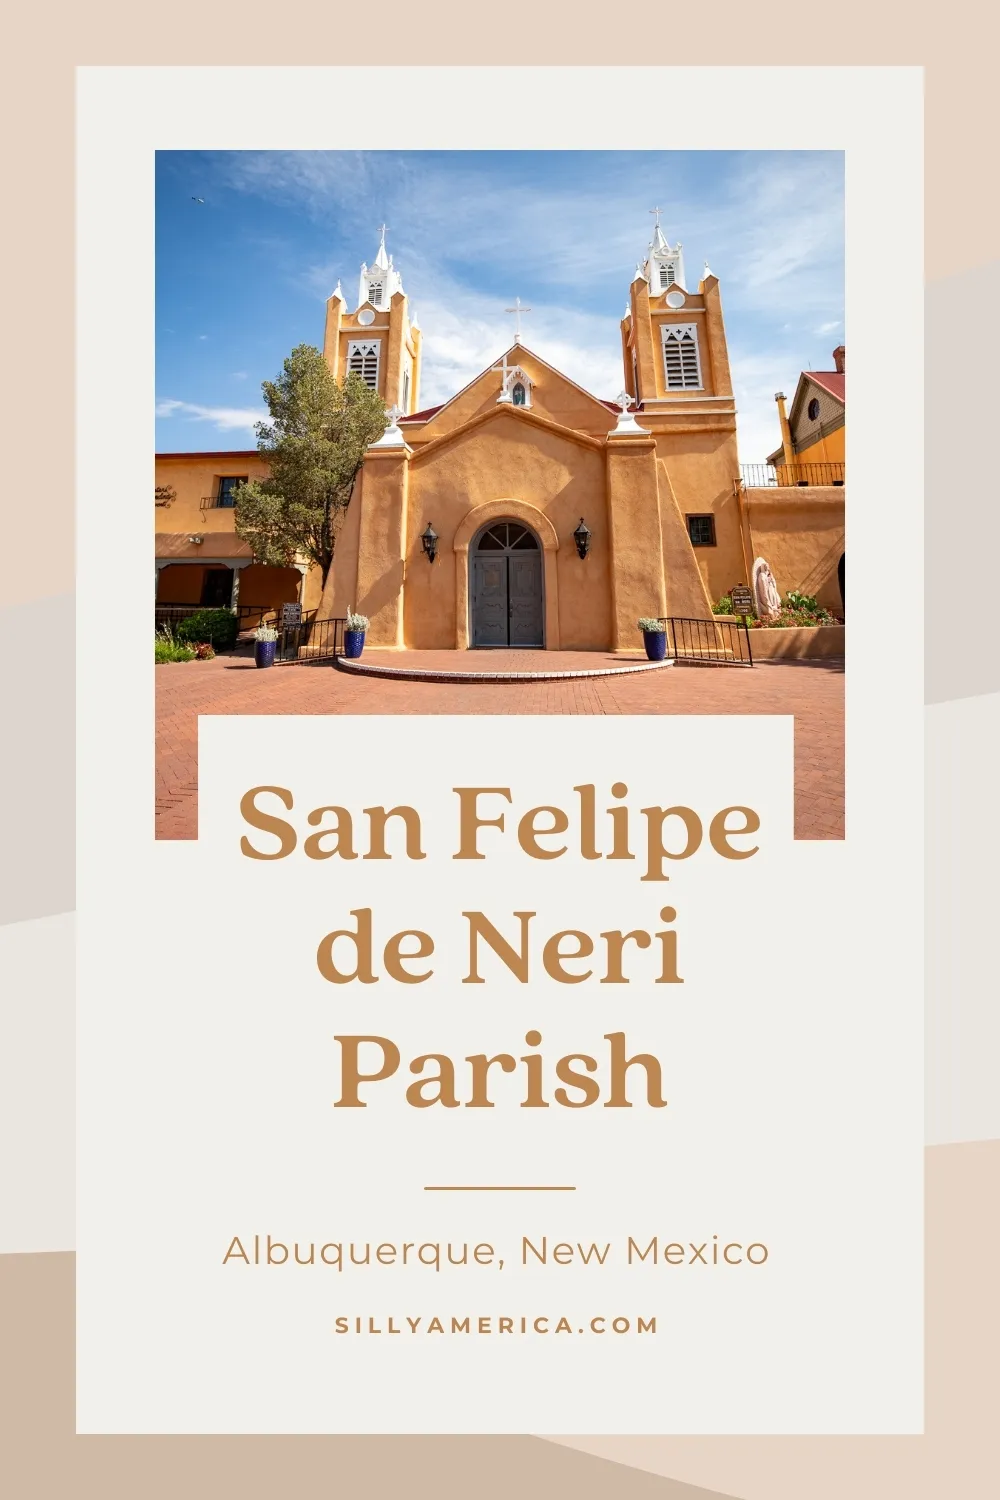 San Felipe de Neri Parish in Albuquerque, New Mexico is a historic place of worship that dates back to 1793. Located in Albuquerque's Old Town Plaza, the church offers tours and services for parishioners. The present church building is listed on the National Register of Historic Places and the New Mexico State Register of Cultural Properties. Visitors are welcome to explore the grounds, take a tour, or stay for a worship service. #NewMexico #AlbuquerqueNewMexico #RoadTrip #NewMexicoRoadTrip